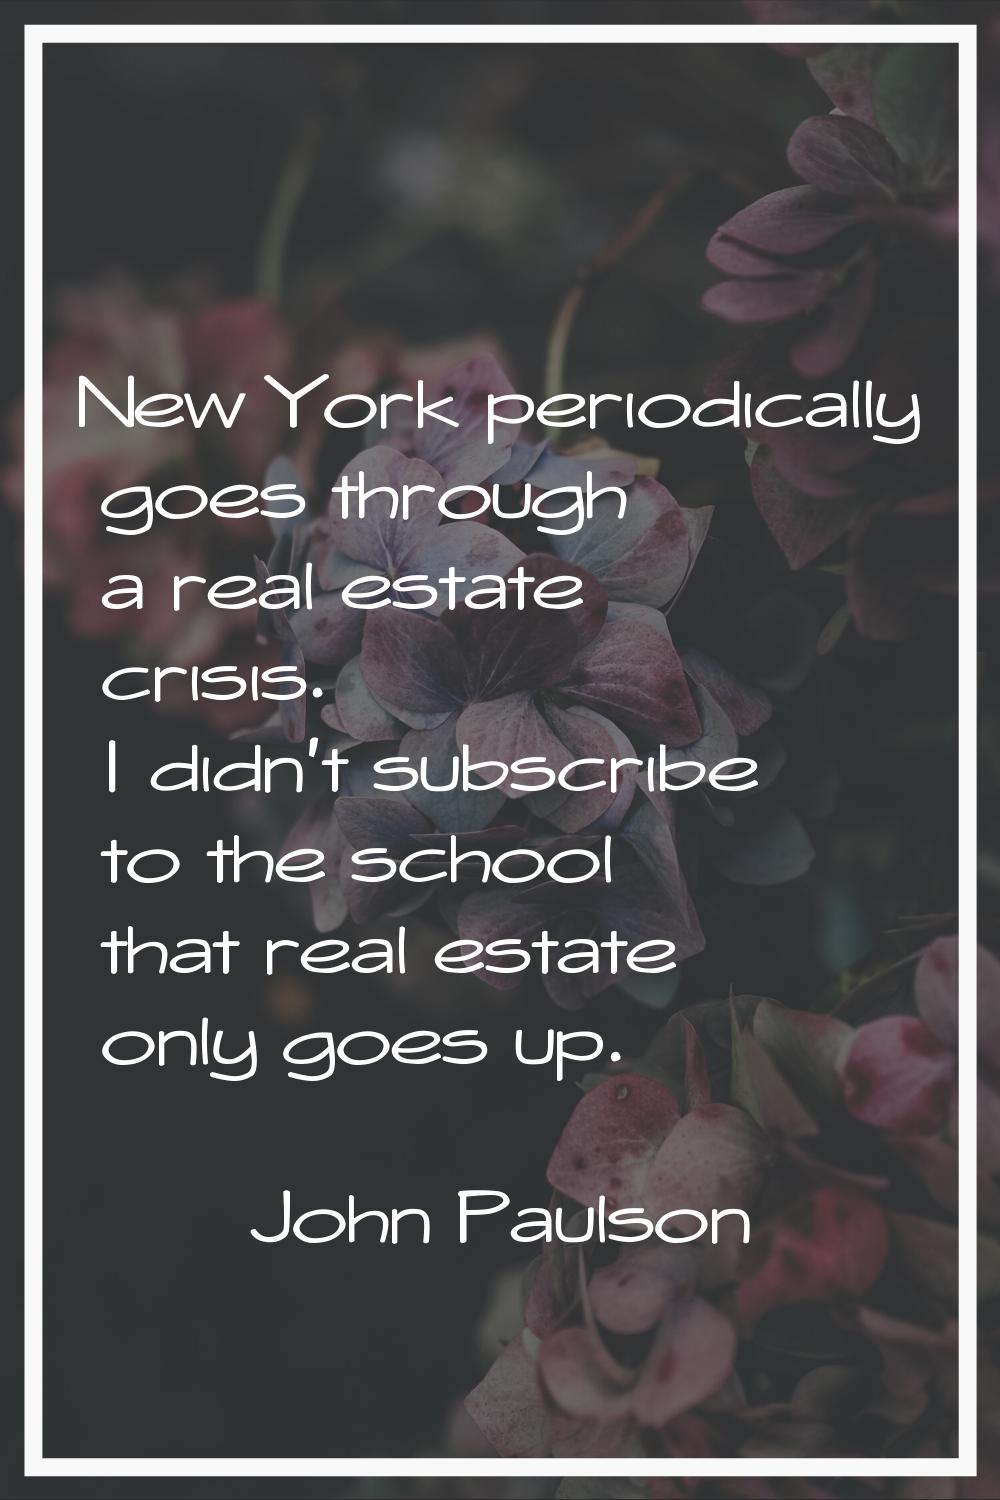 New York periodically goes through a real estate crisis. I didn't subscribe to the school that real